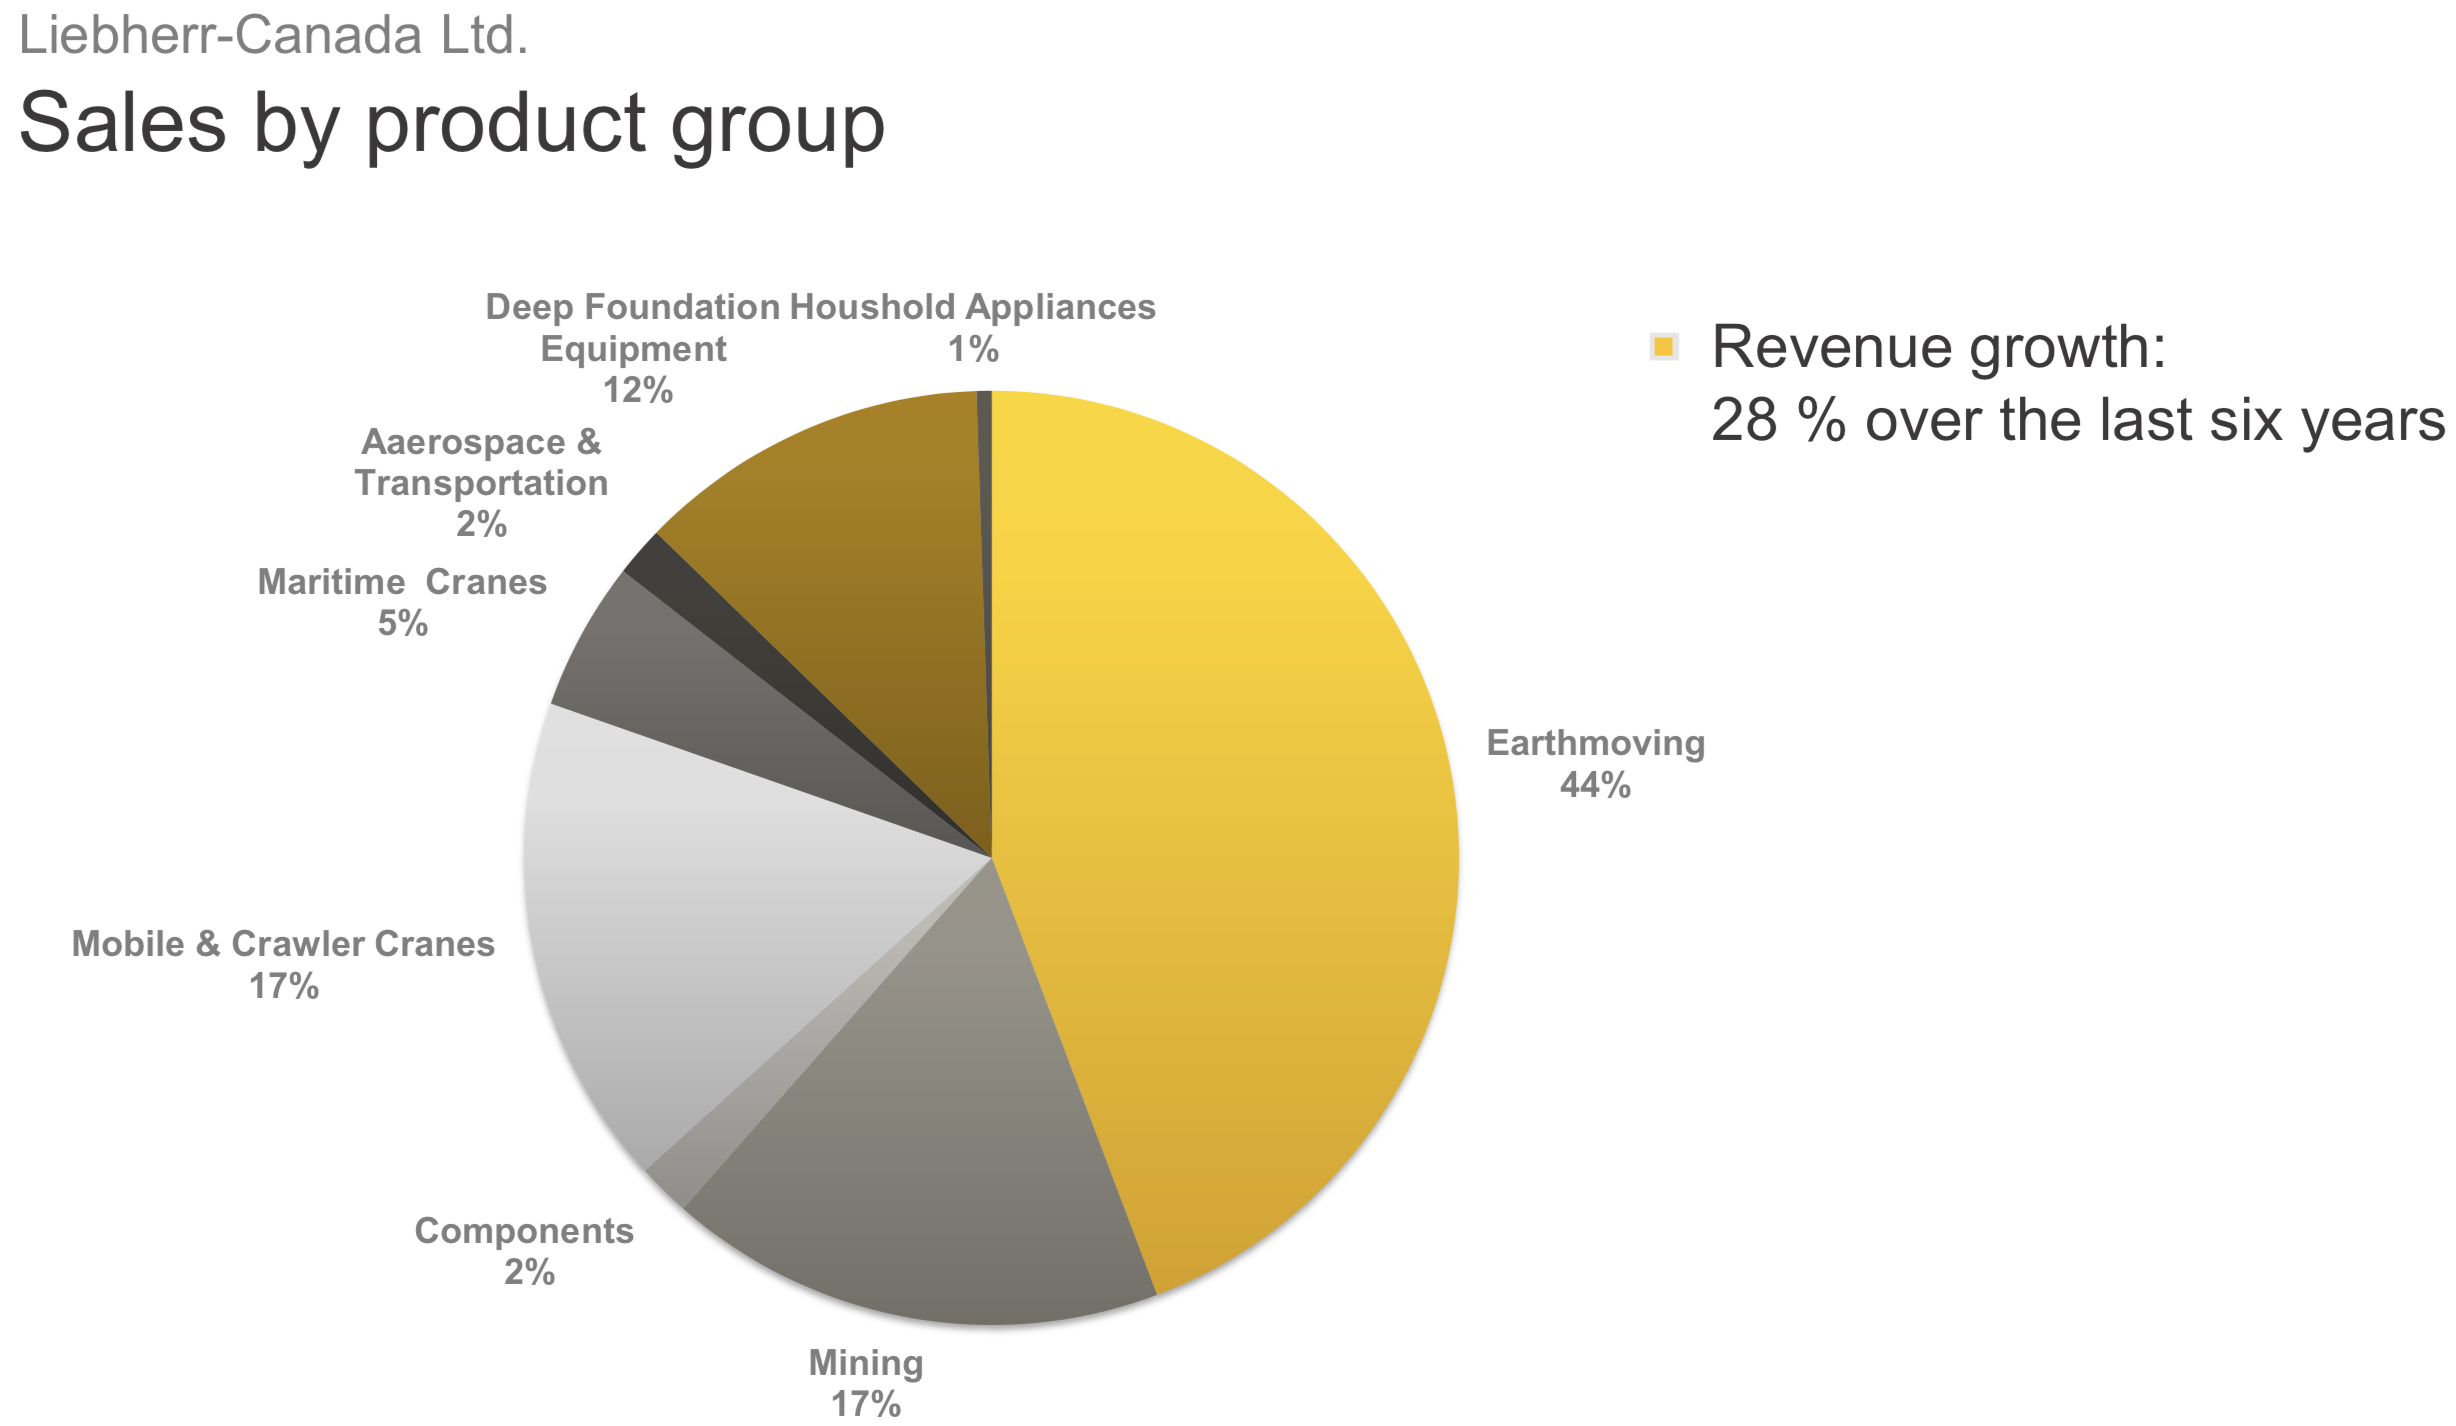 Liebherr-Canada Ltd. Sales by product group pie chart